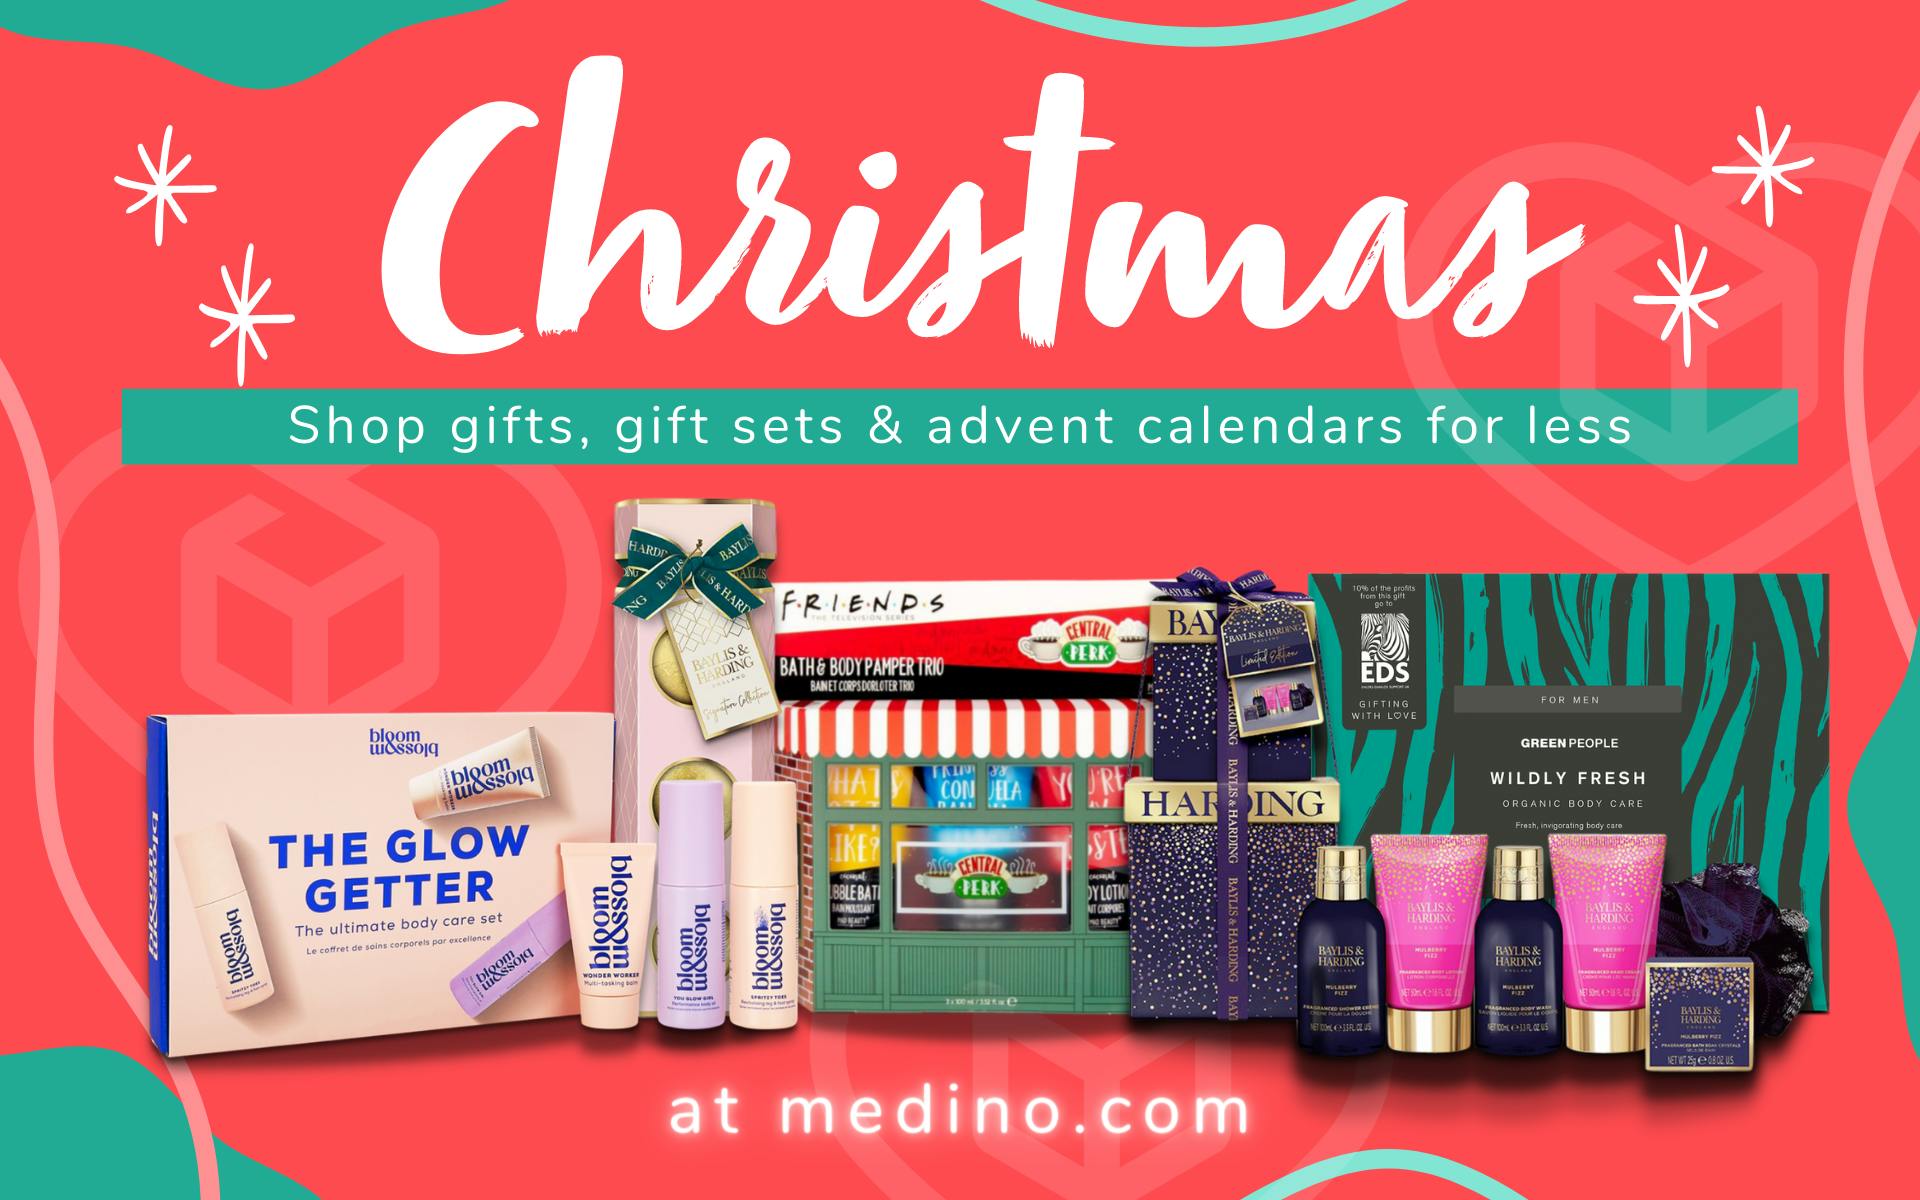 Header announcing Christmas gift products and offers at medino